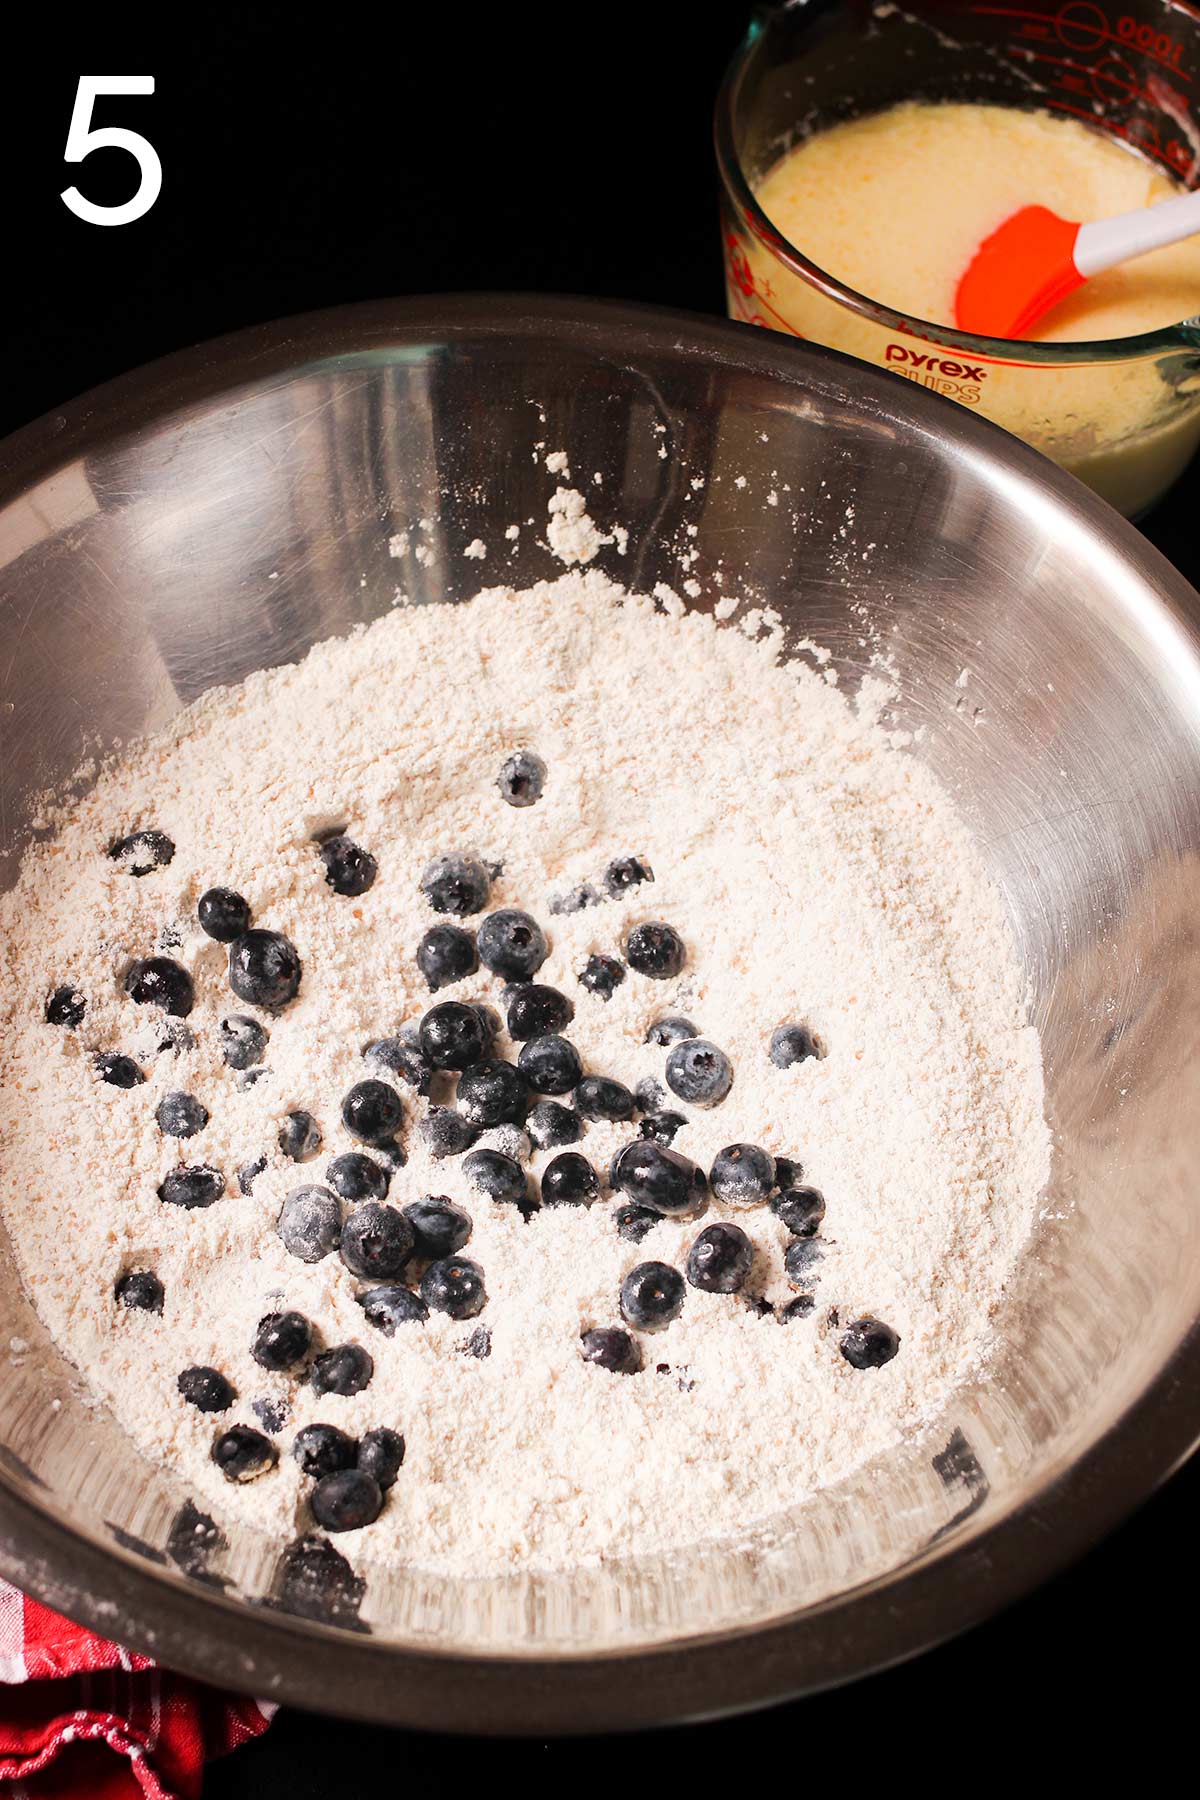 tossing blueberries into dry mixture in mixing bowl.